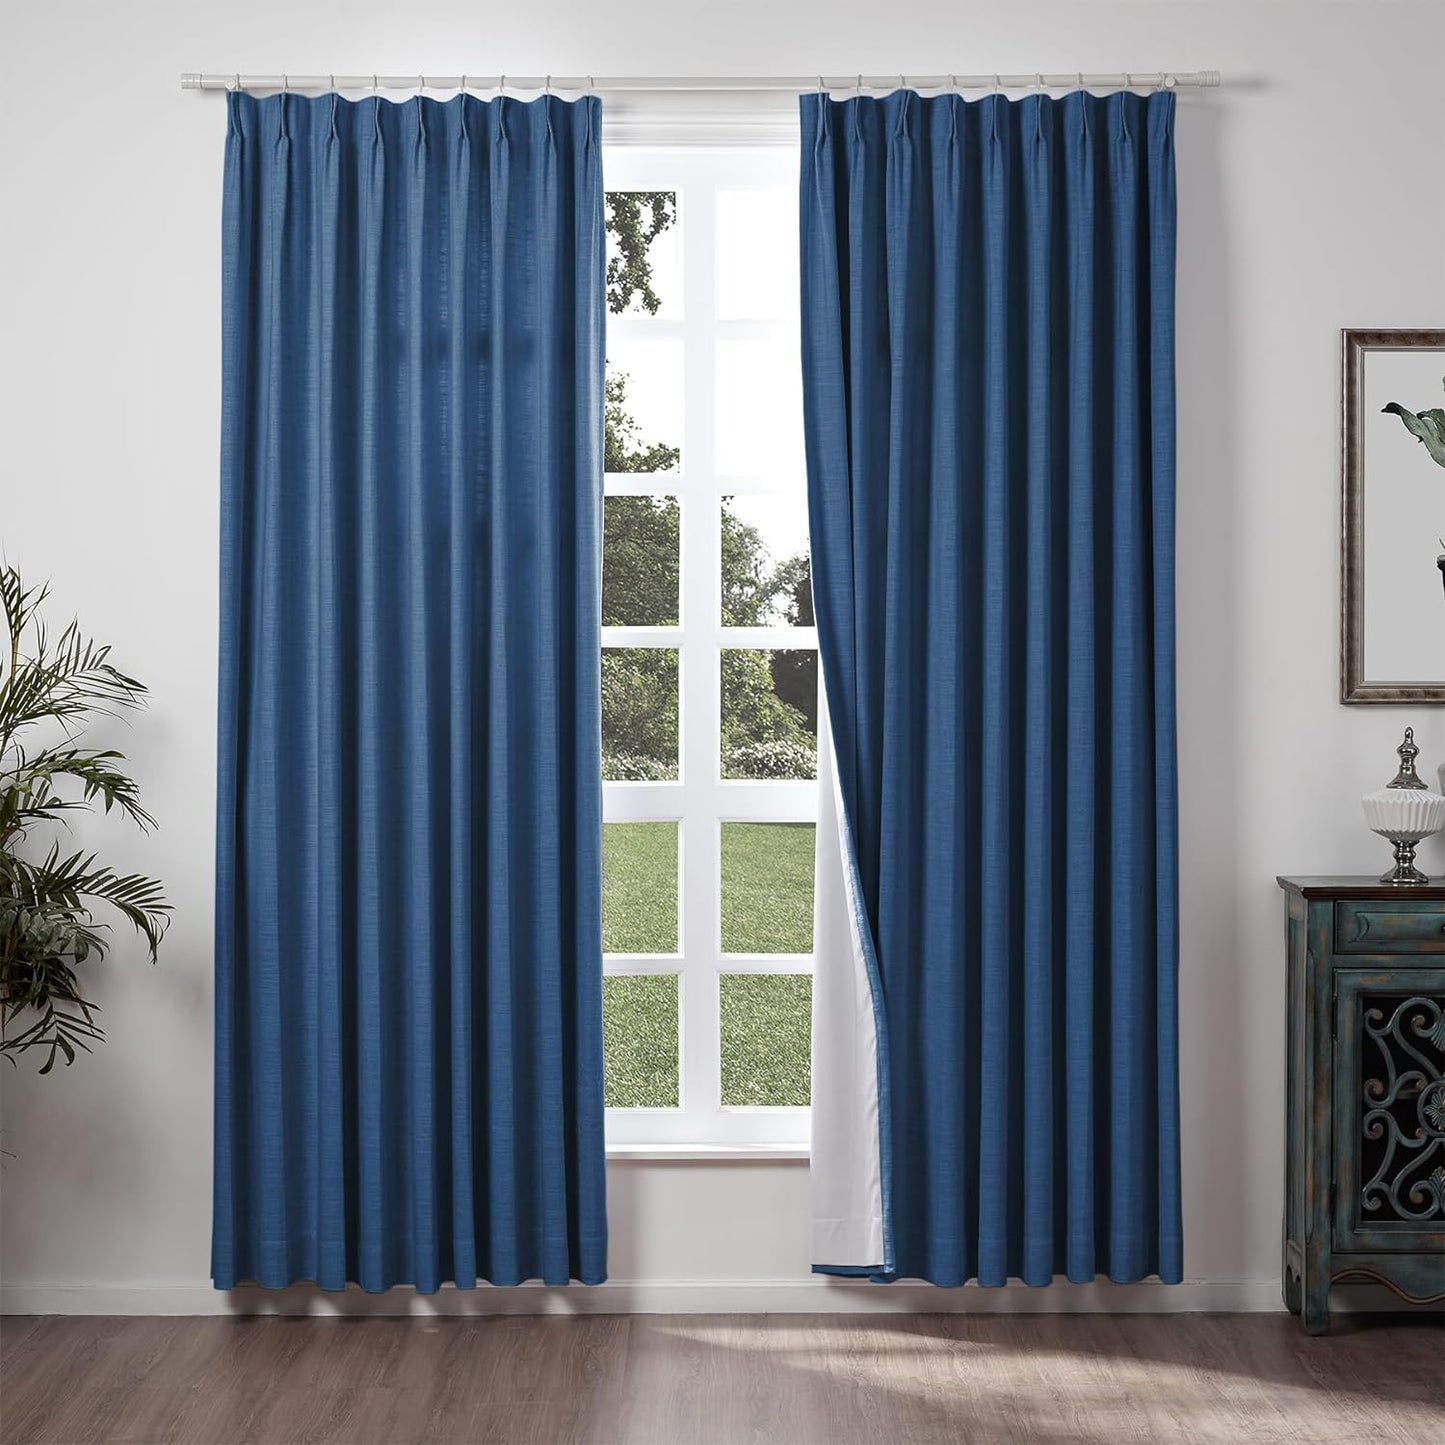 Chadmade 50" W X 63" L Polyester Linen Drape with Blackout Lining Pinch Pleat Curtain for Sliding Door Patio Door Living Room Bedroom, (1 Panel) Sand Beige Tallis Collection  ChadMade Navy Blue (36) 100Wx84L 